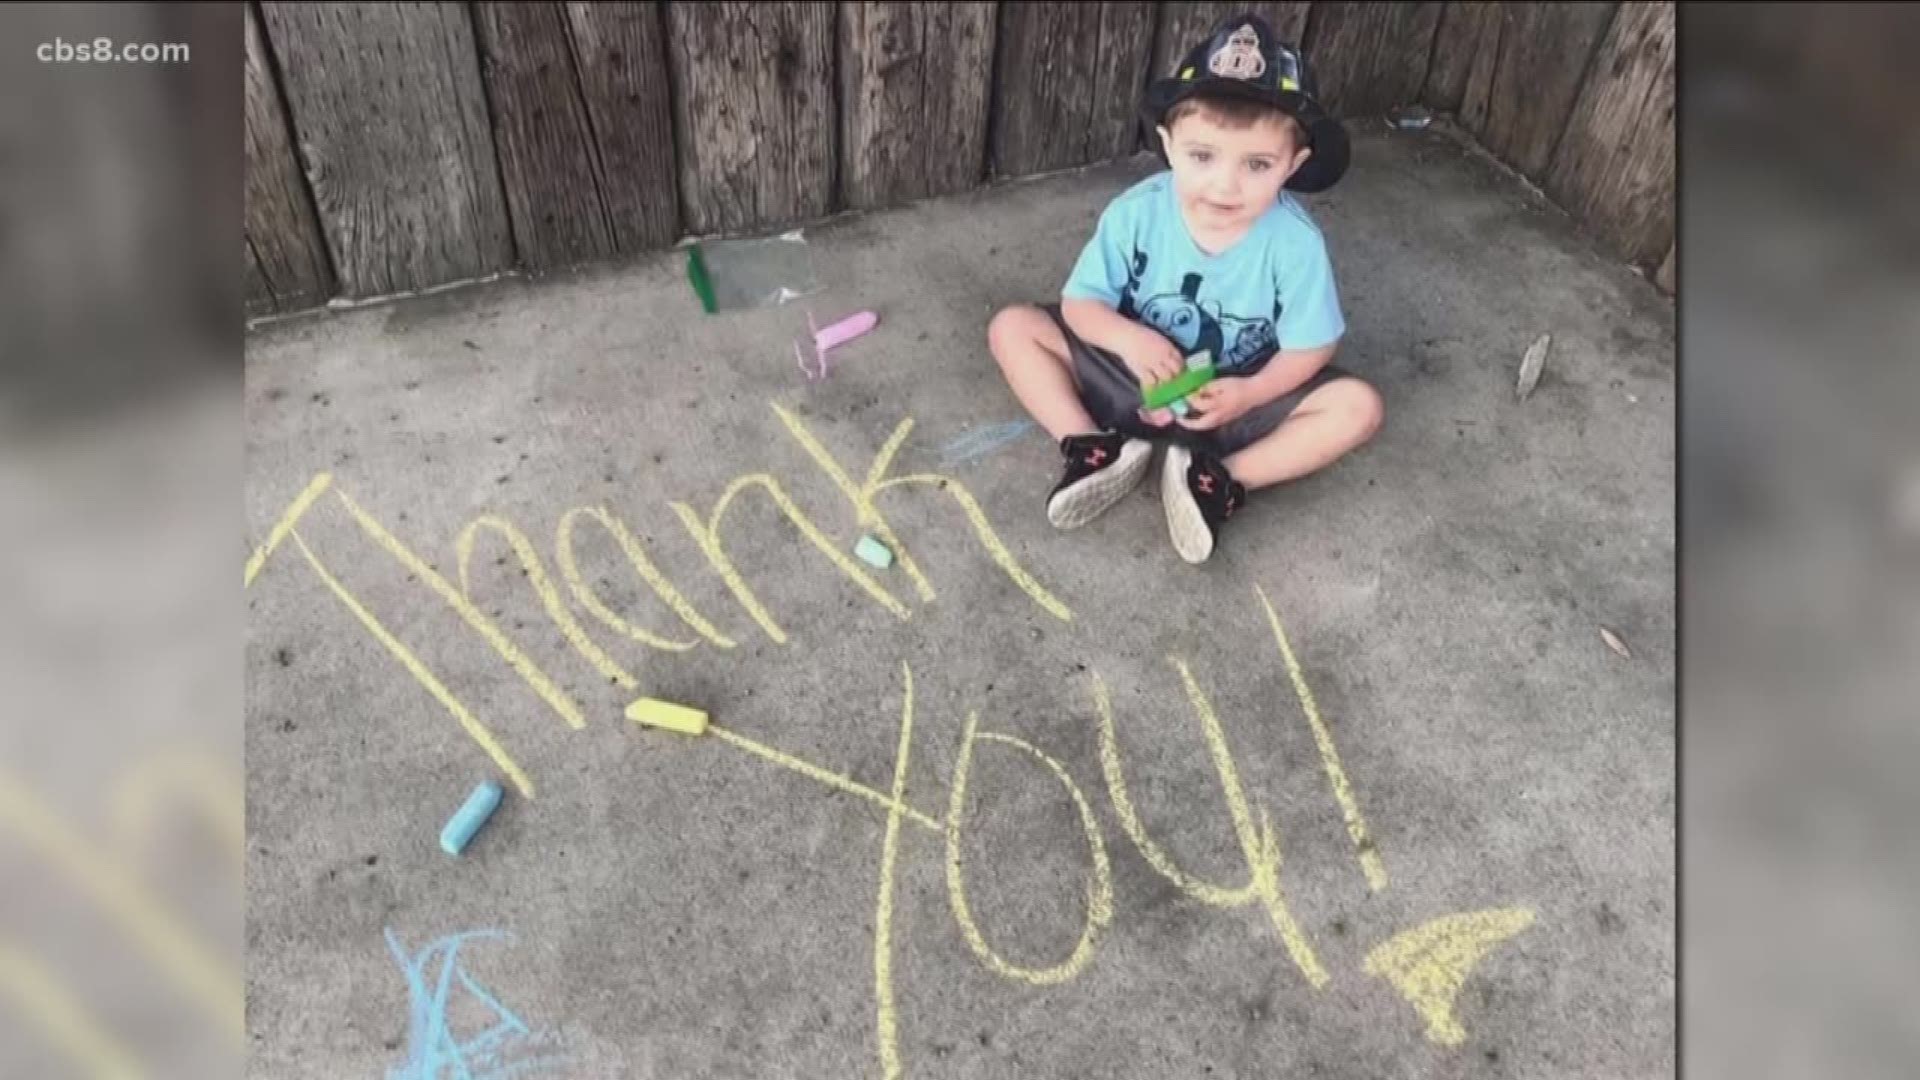 News 8's Abbie Alford shows us how the San Diego community of all ages are sending their love amid the coronavirus pandemic.